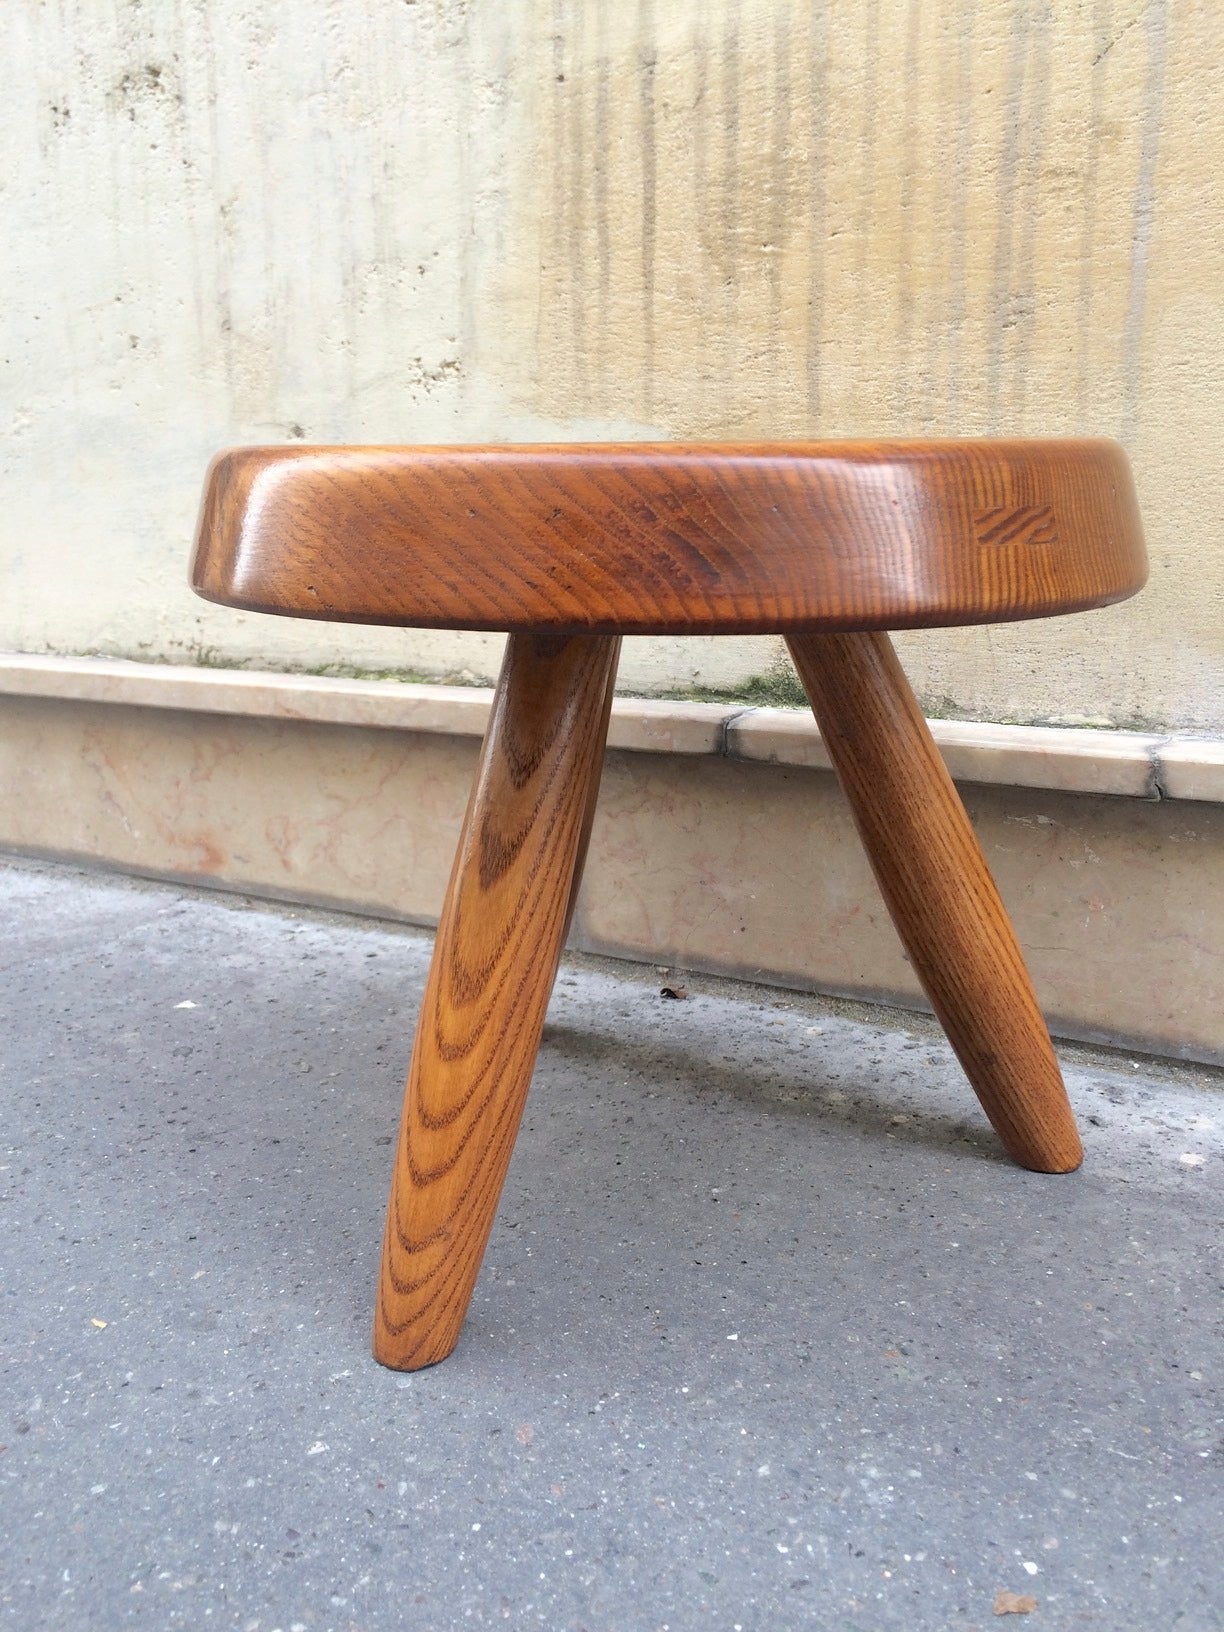 Charlotte Perriand ash tree tripod stool in vintage condition.